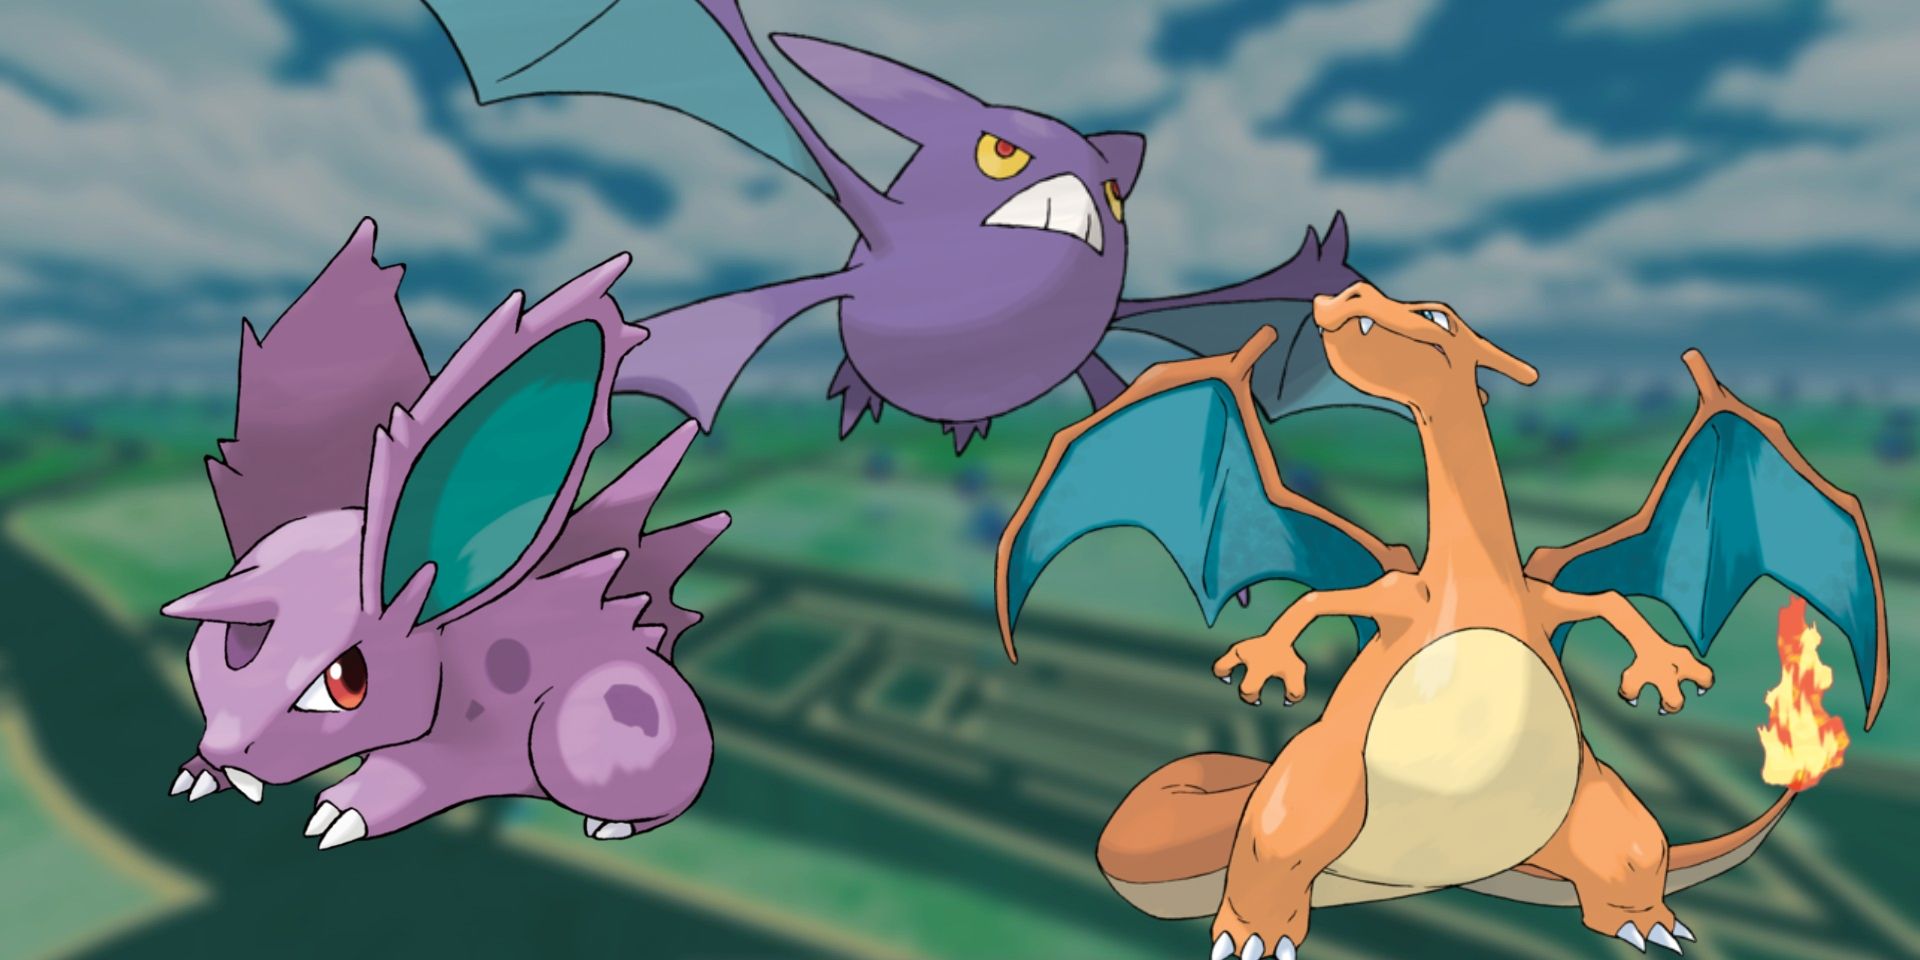 Some of Arlo's possible team members in Pokémon GO in April 2023, including Nidoran, Crobat, and Charizard. In the background is an image of the  game's map.